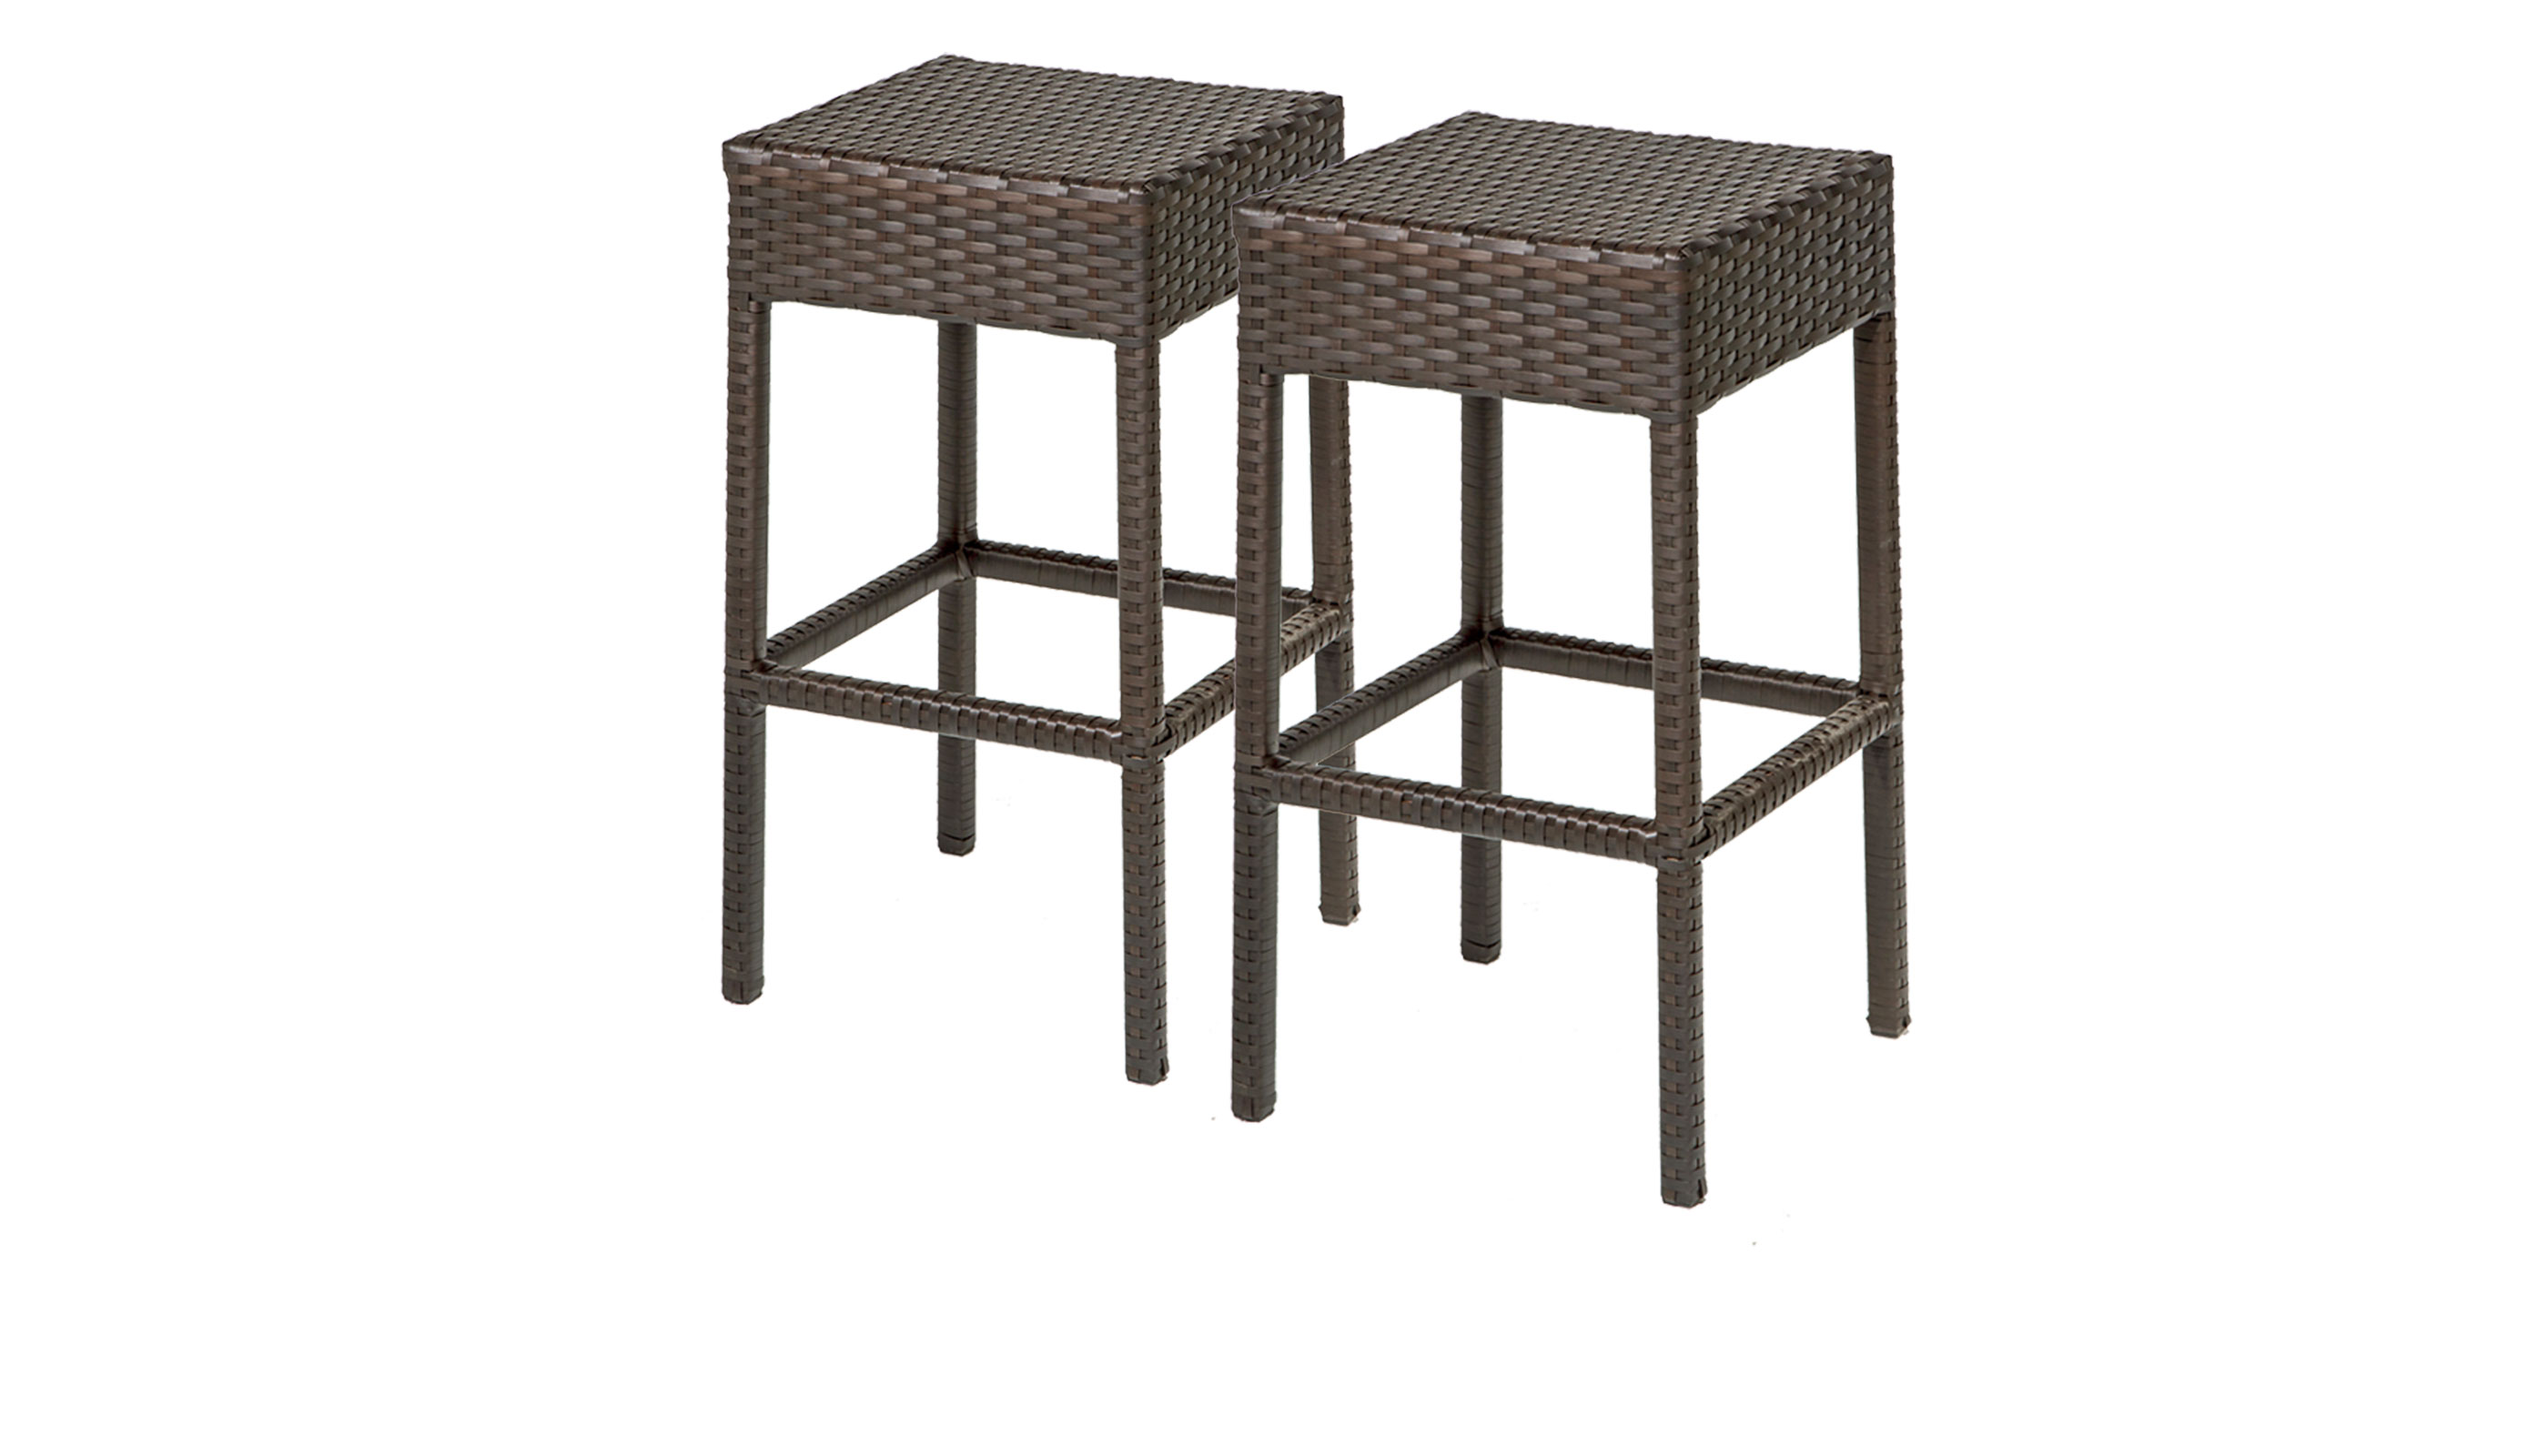 Barbados Bar Table Set with Cart, Basket, and 4 Backless Barstools 7 Piece Outdoor Wicker Patio Furniture - TK Classics